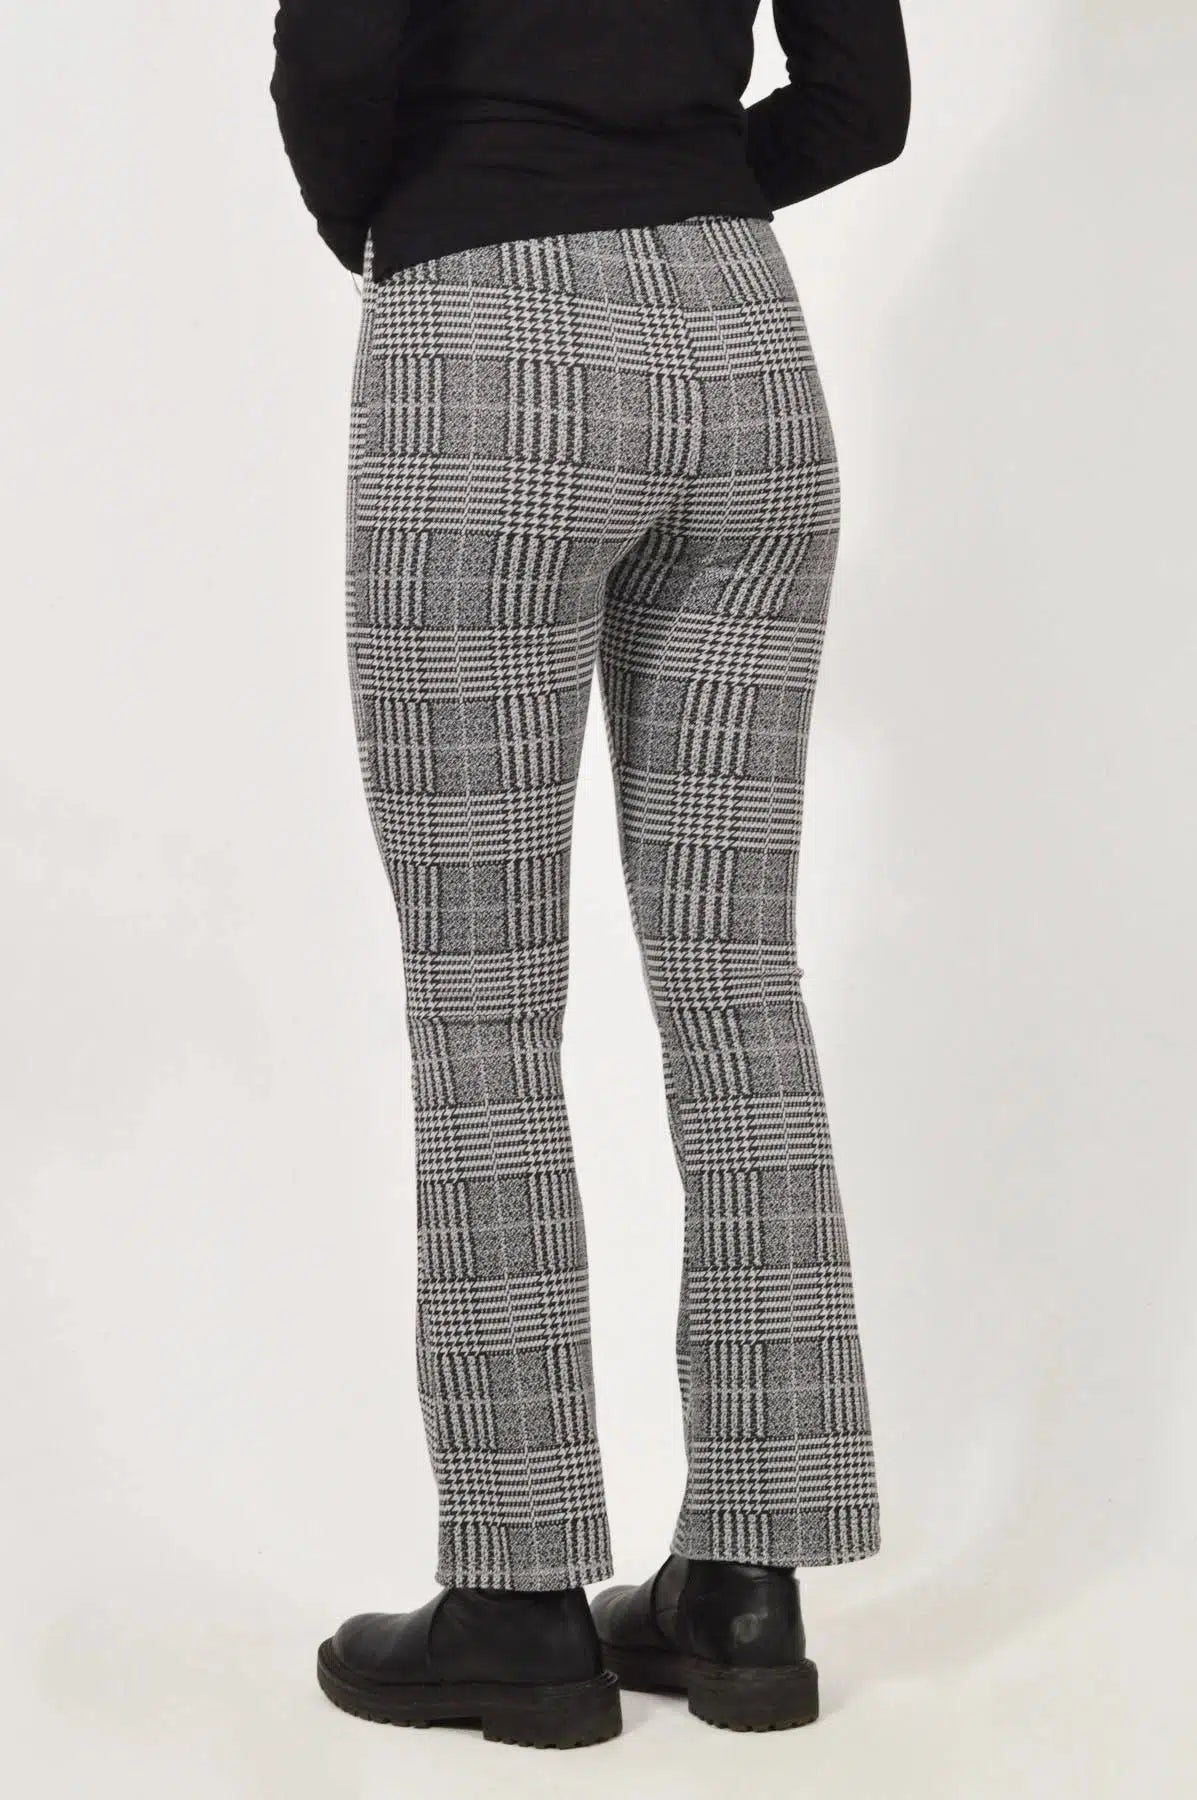 Topshop Check Stretch Trousers